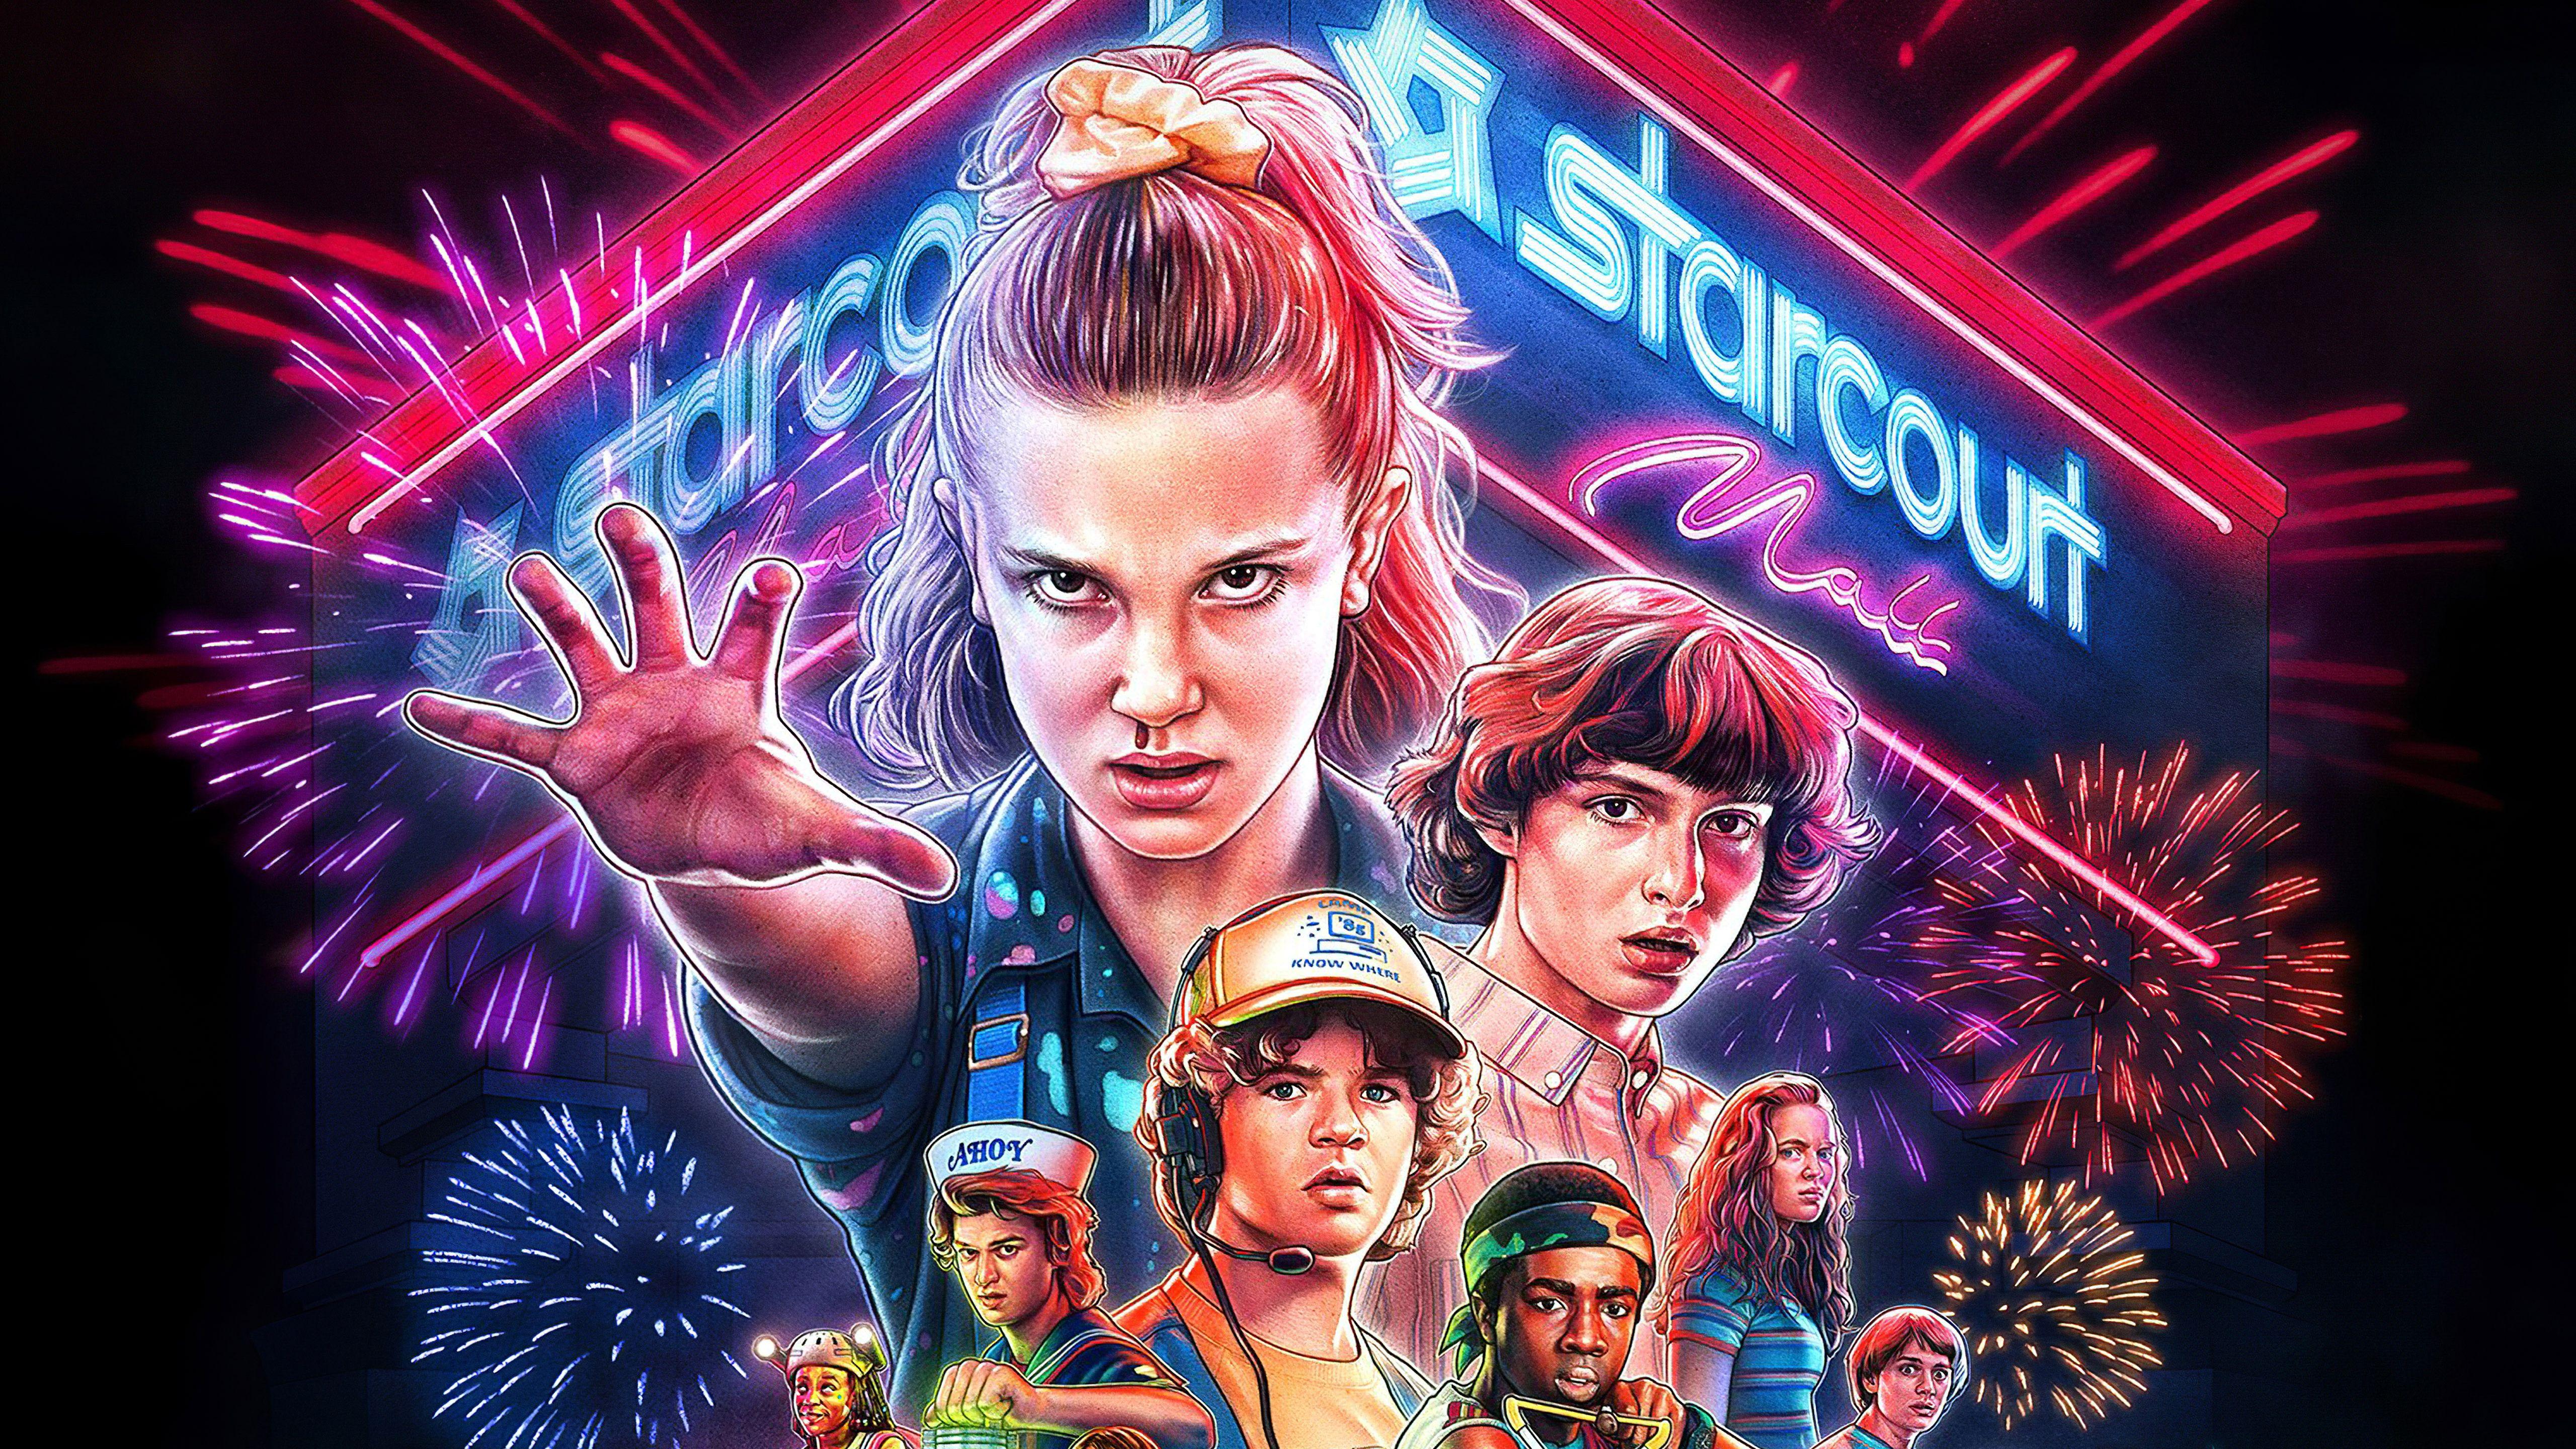 Stranger Things Cast Wallpapers - Top Free Stranger Things Cast